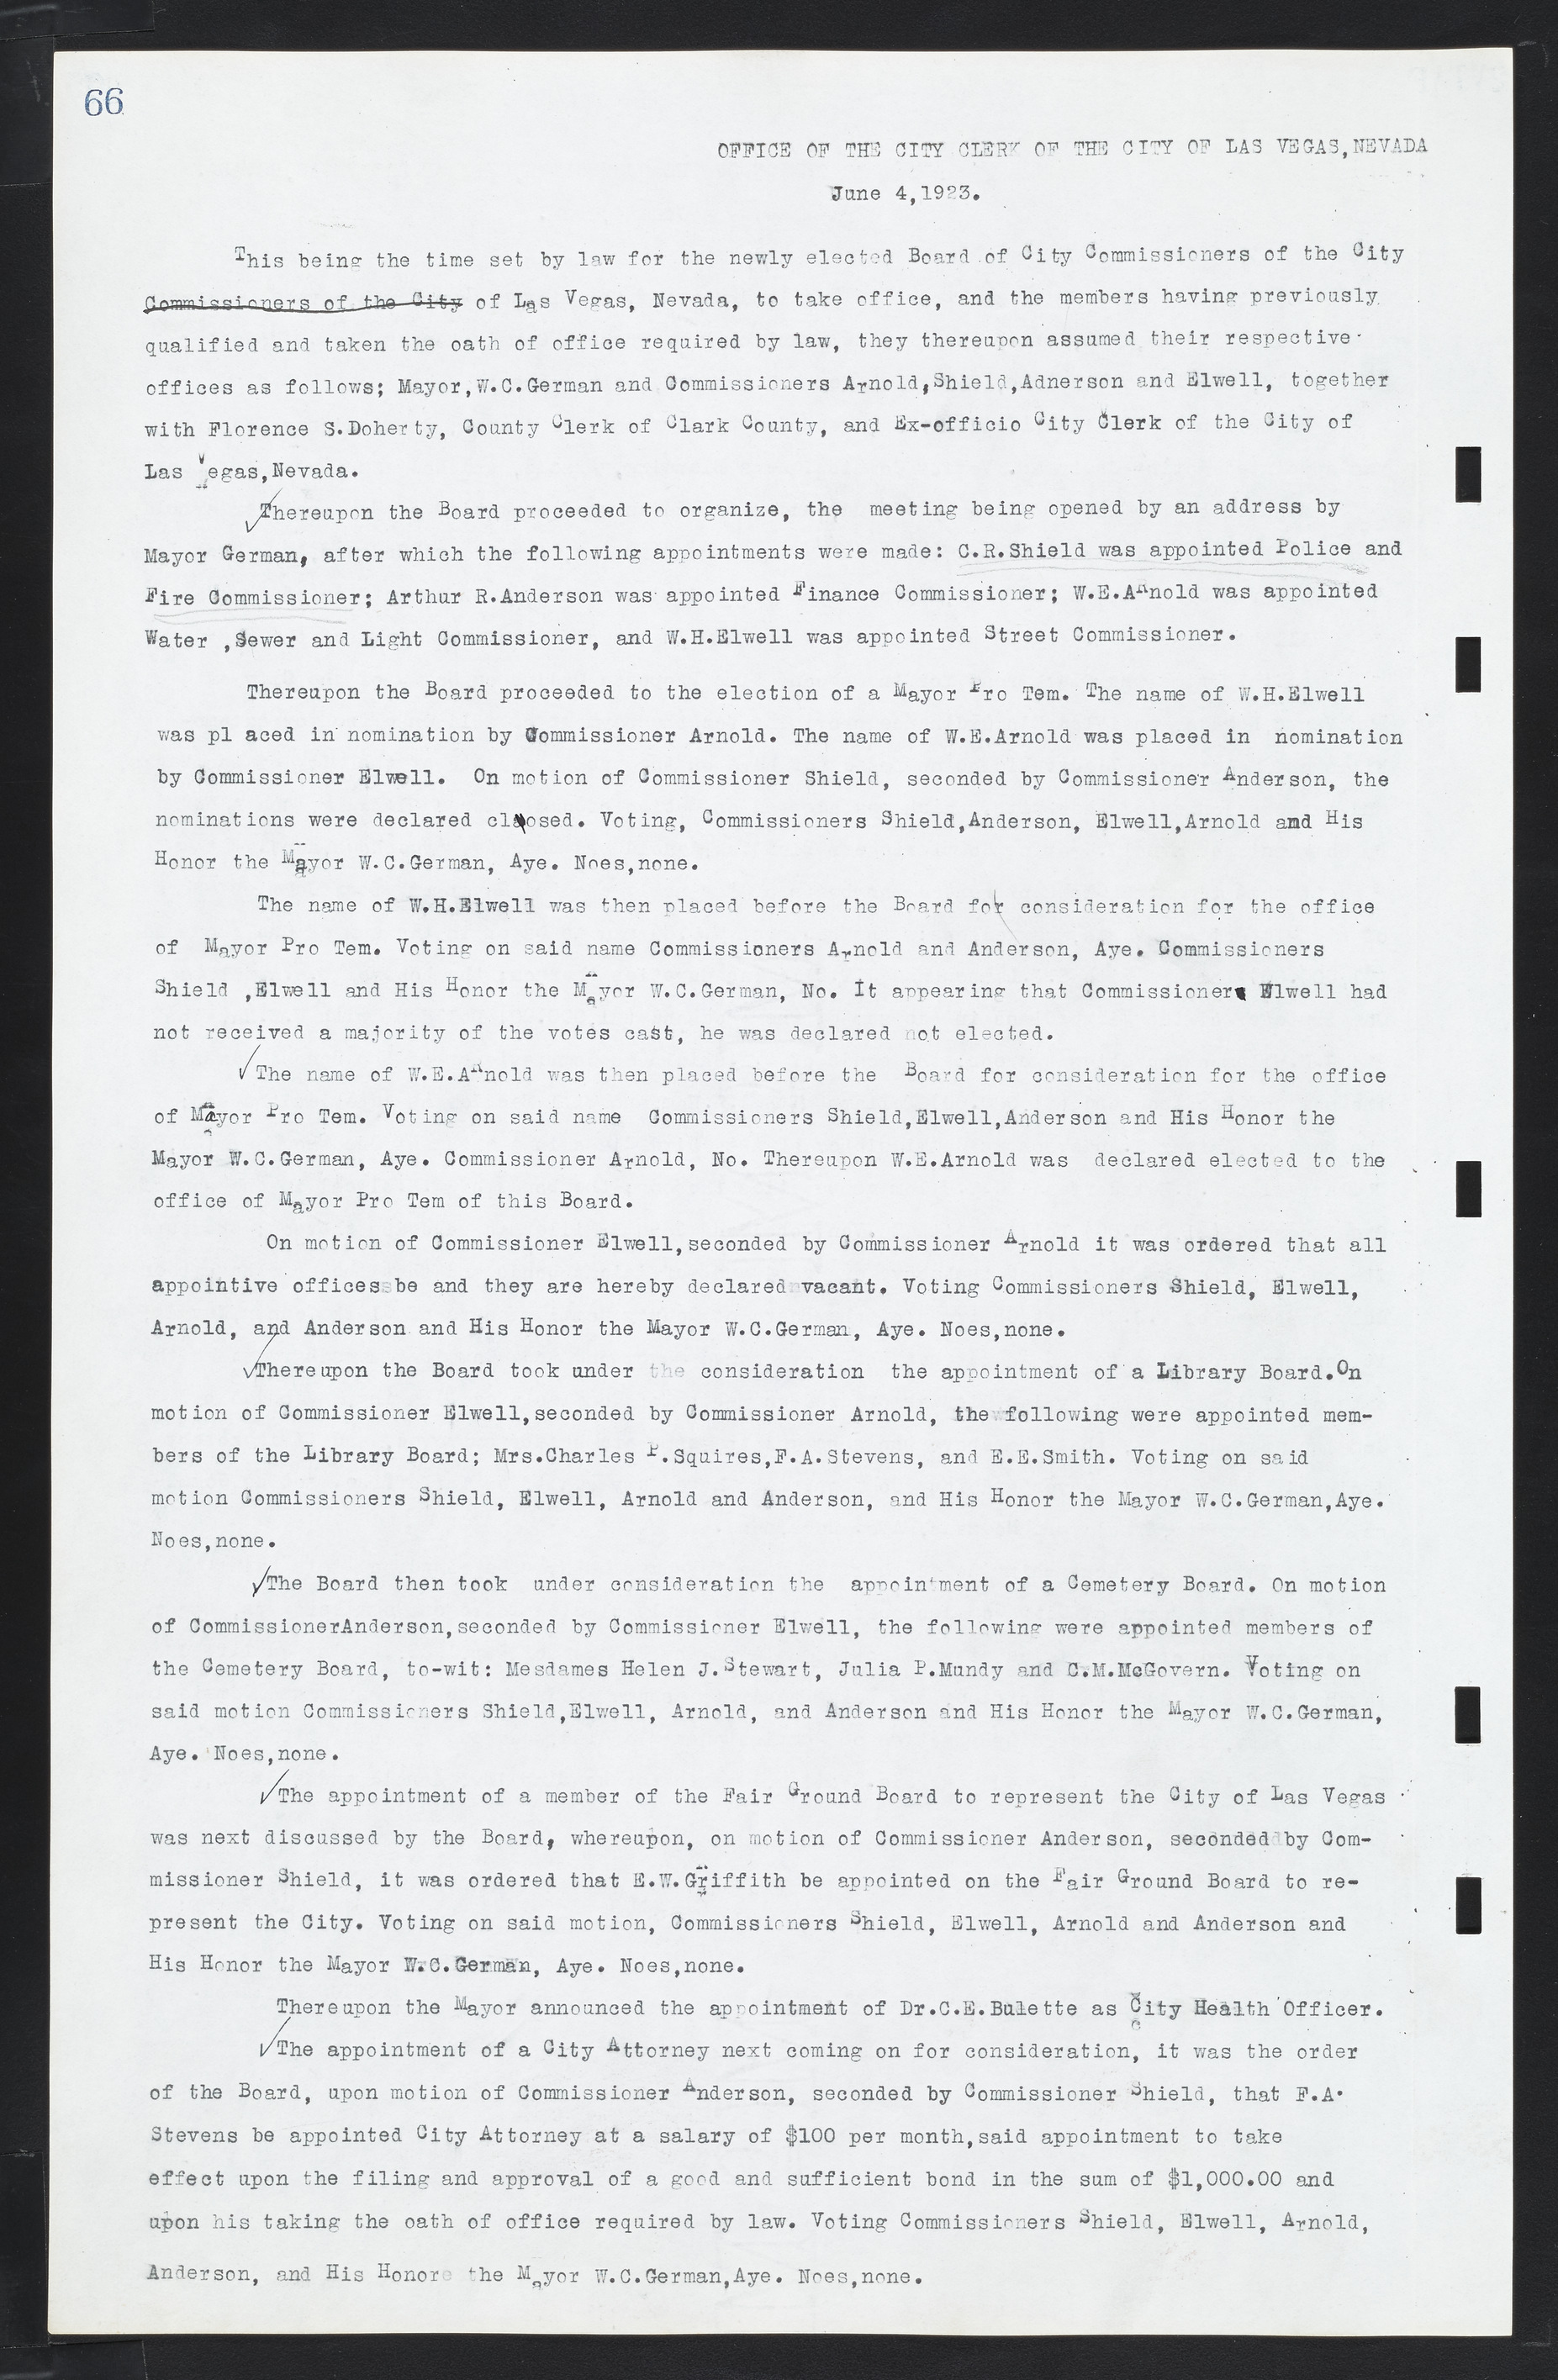 Las Vegas City Commission Minutes, March 1, 1922 to May 10, 1929, lvc000002-73